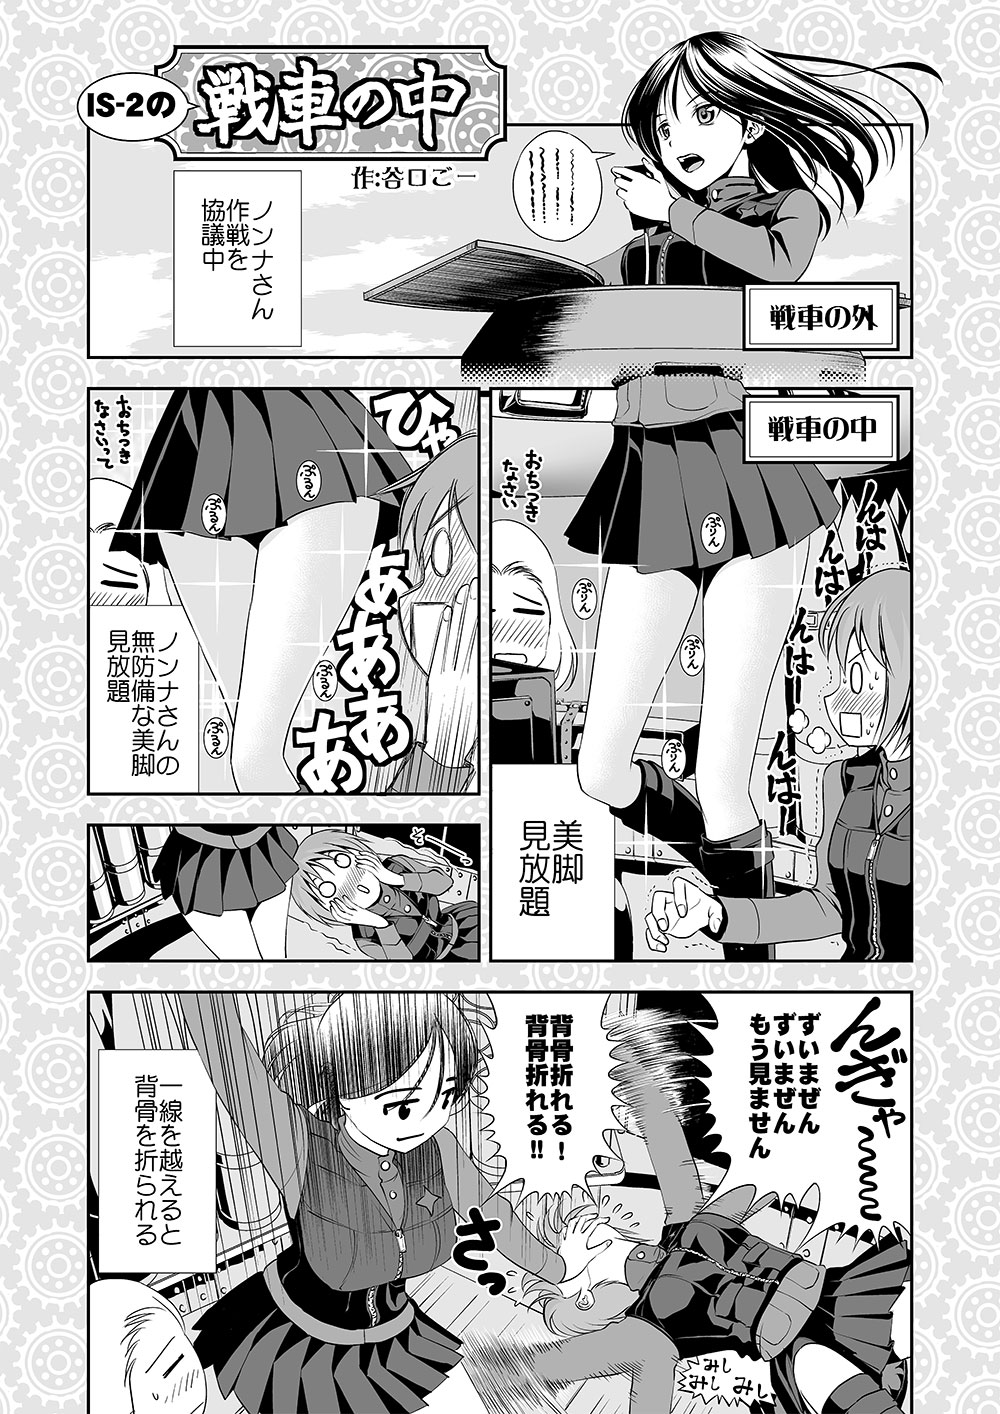 3girls black_legwear blush breasts character_request check_commentary clara_(girls_und_panzer) comic commentary commentary_request embarrassed eyebrows girls_und_panzer greyscale hair_between_eyes highres is-2 large_breasts long_hair long_sleeves military military_uniform military_vehicle miniskirt monochrome multiple_girls nonna o_o open_mouth pleated_skirt short_hair skirt sweatdrop taniguchi_go_̄ thighs translation_request trembling uniform vest yuri